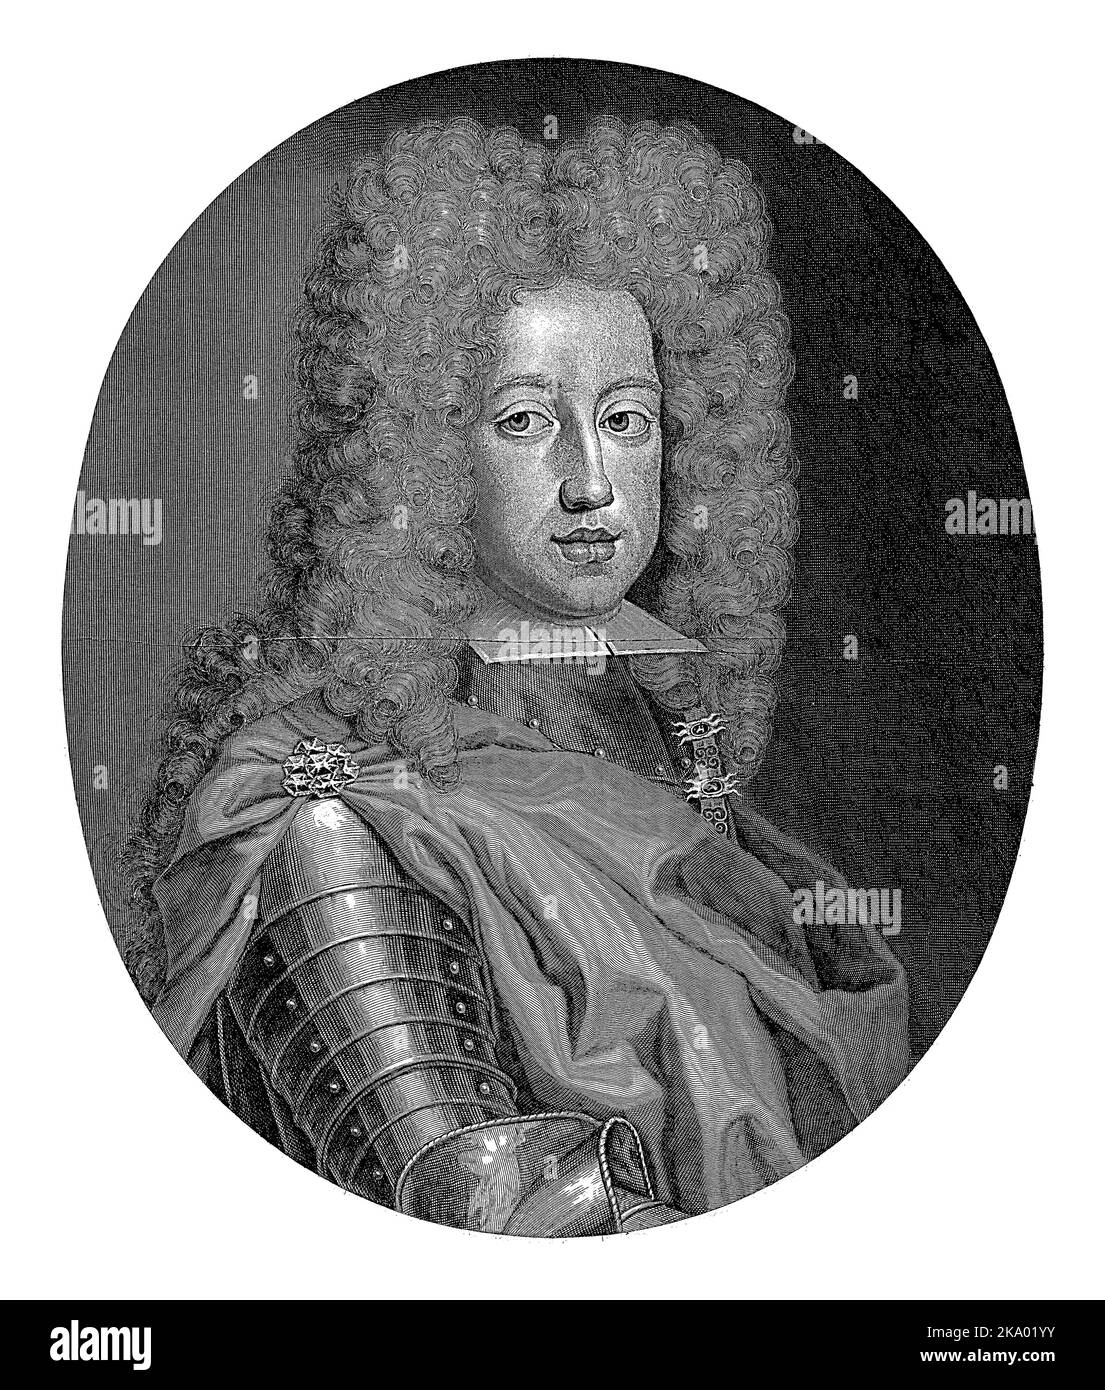 Portrait of Emperor Charles VI, Pieter van Gunst, 1701 - 1711 Charles VI, Emperor of the Holy Roman Empire. He is portrayed as pretender to the throne Stock Photo